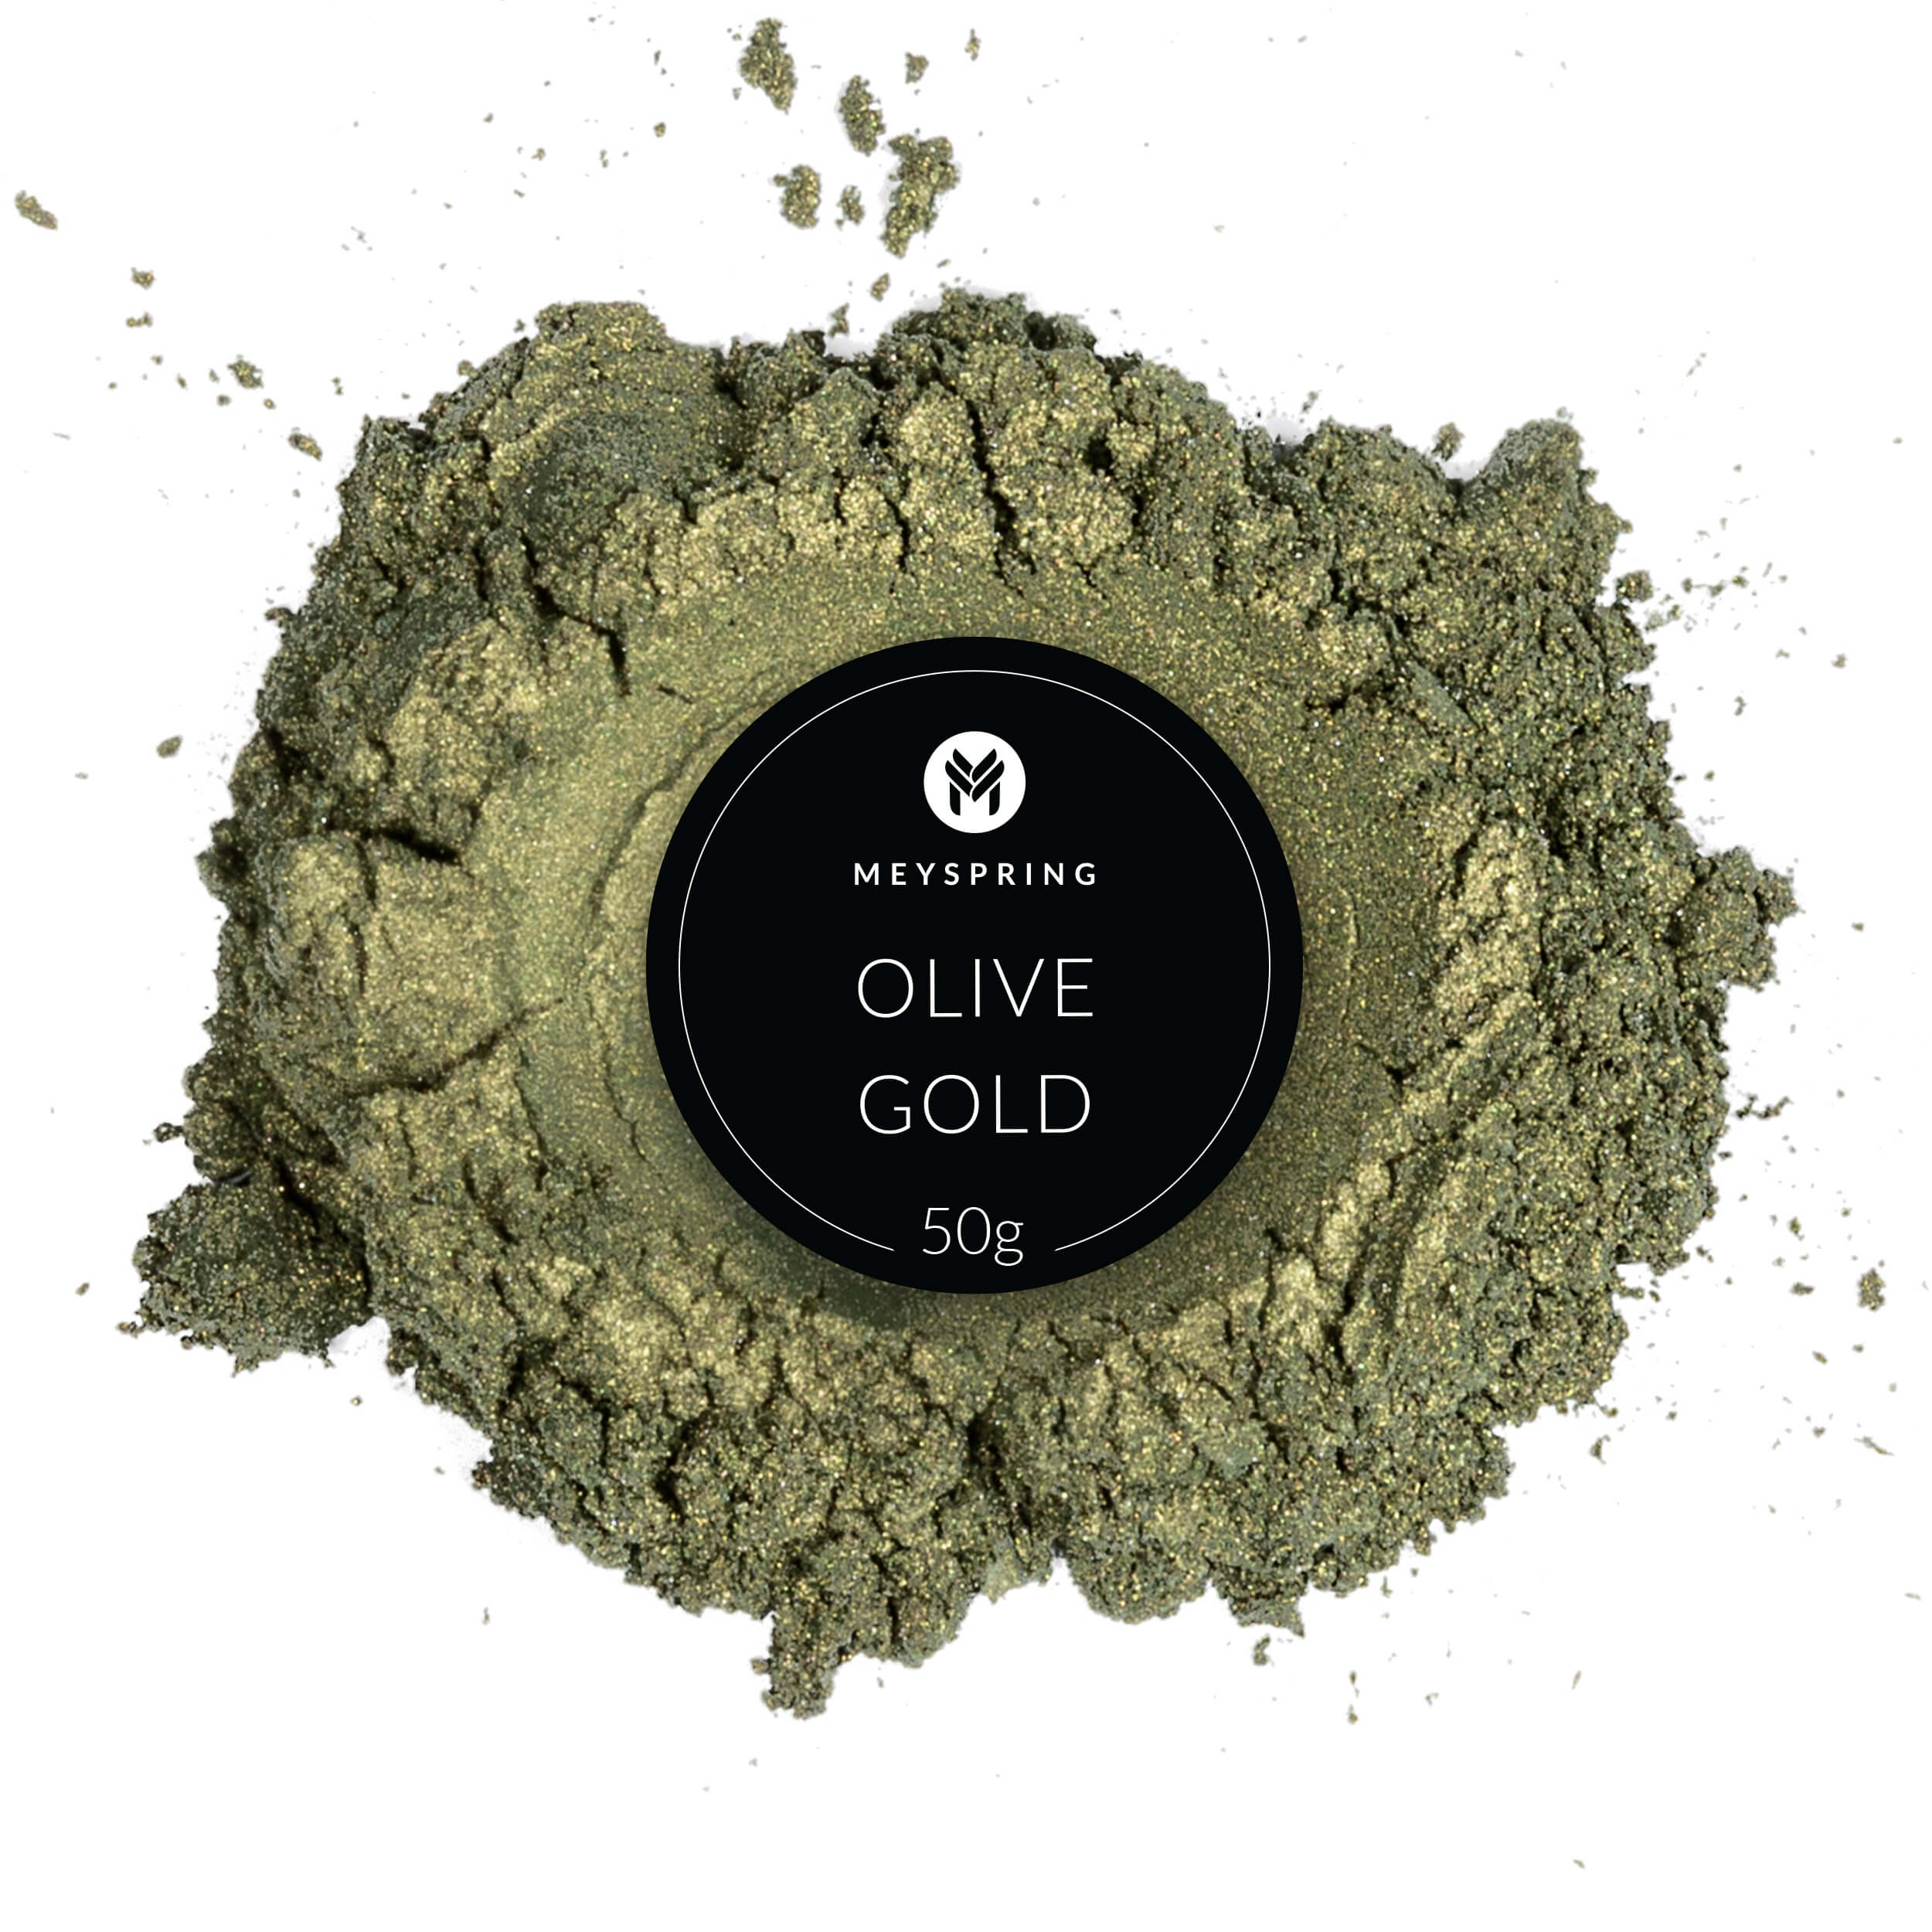 MEYSPRING Olive Gold Epoxy Resin Color Pigment - 50 Grams - Great for Resin Art and UV Resin